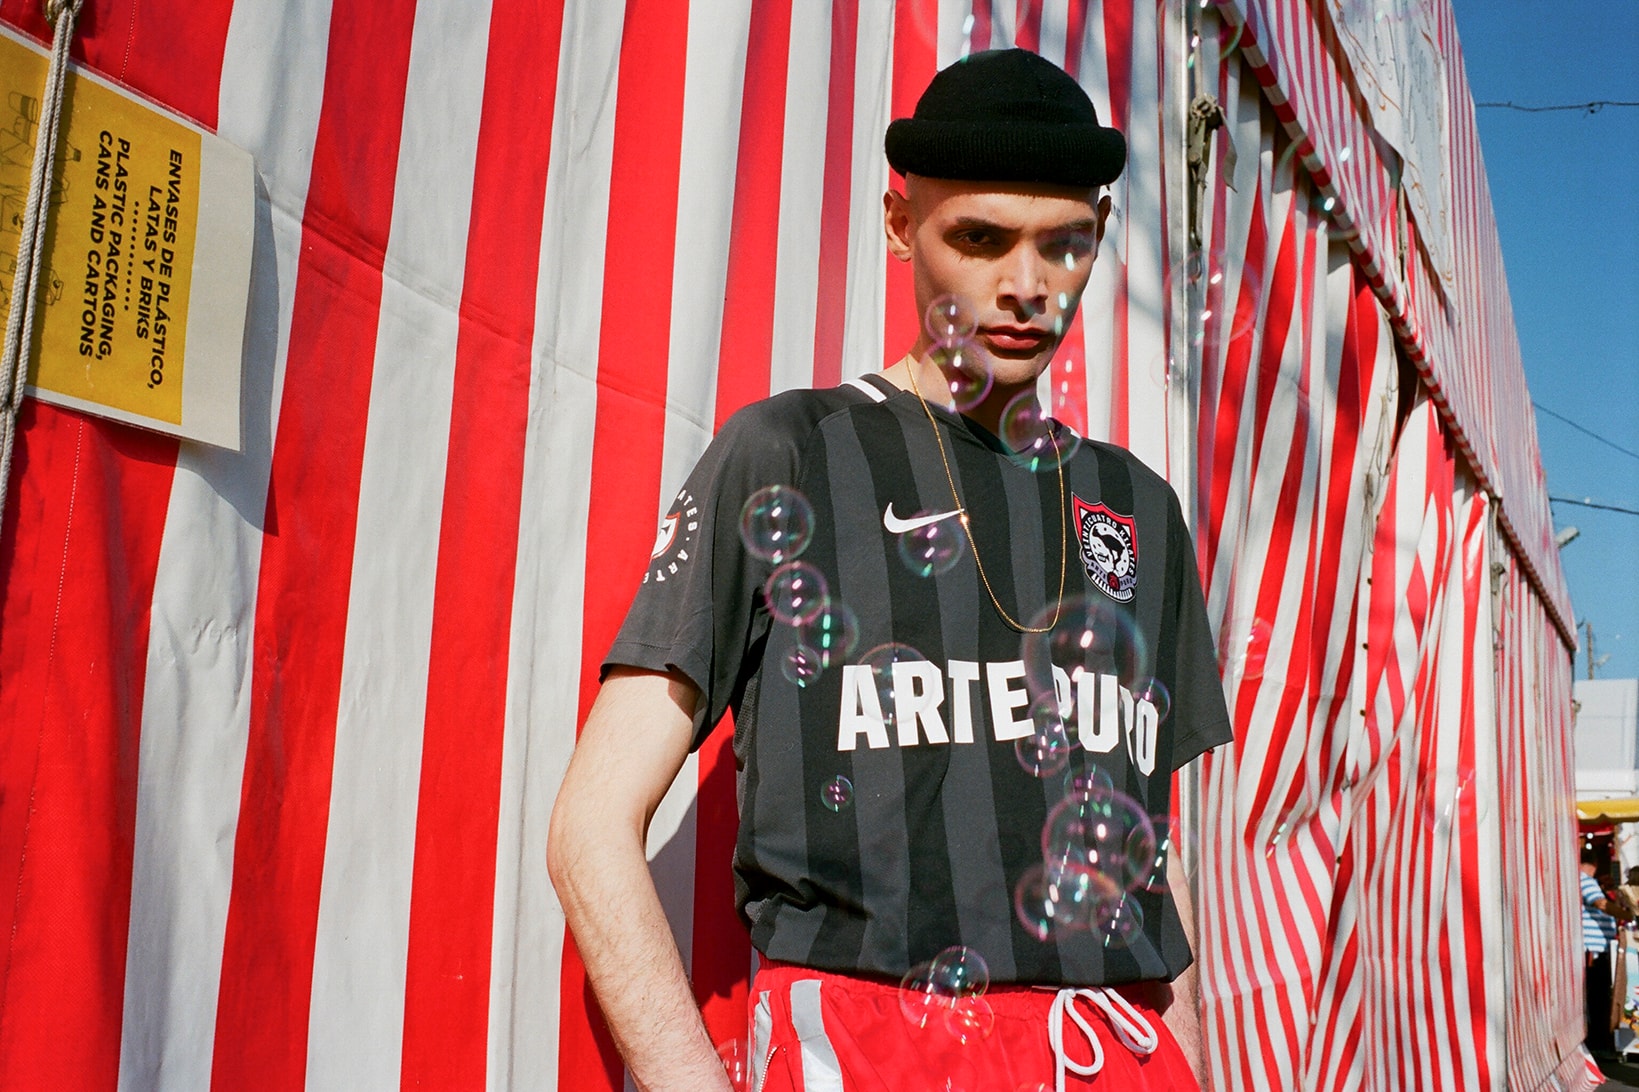 24 Kilates Nike Football Jersey Collaboration Arte Puro Black Grey Red Release Details Information World Cup 2018 FIFA